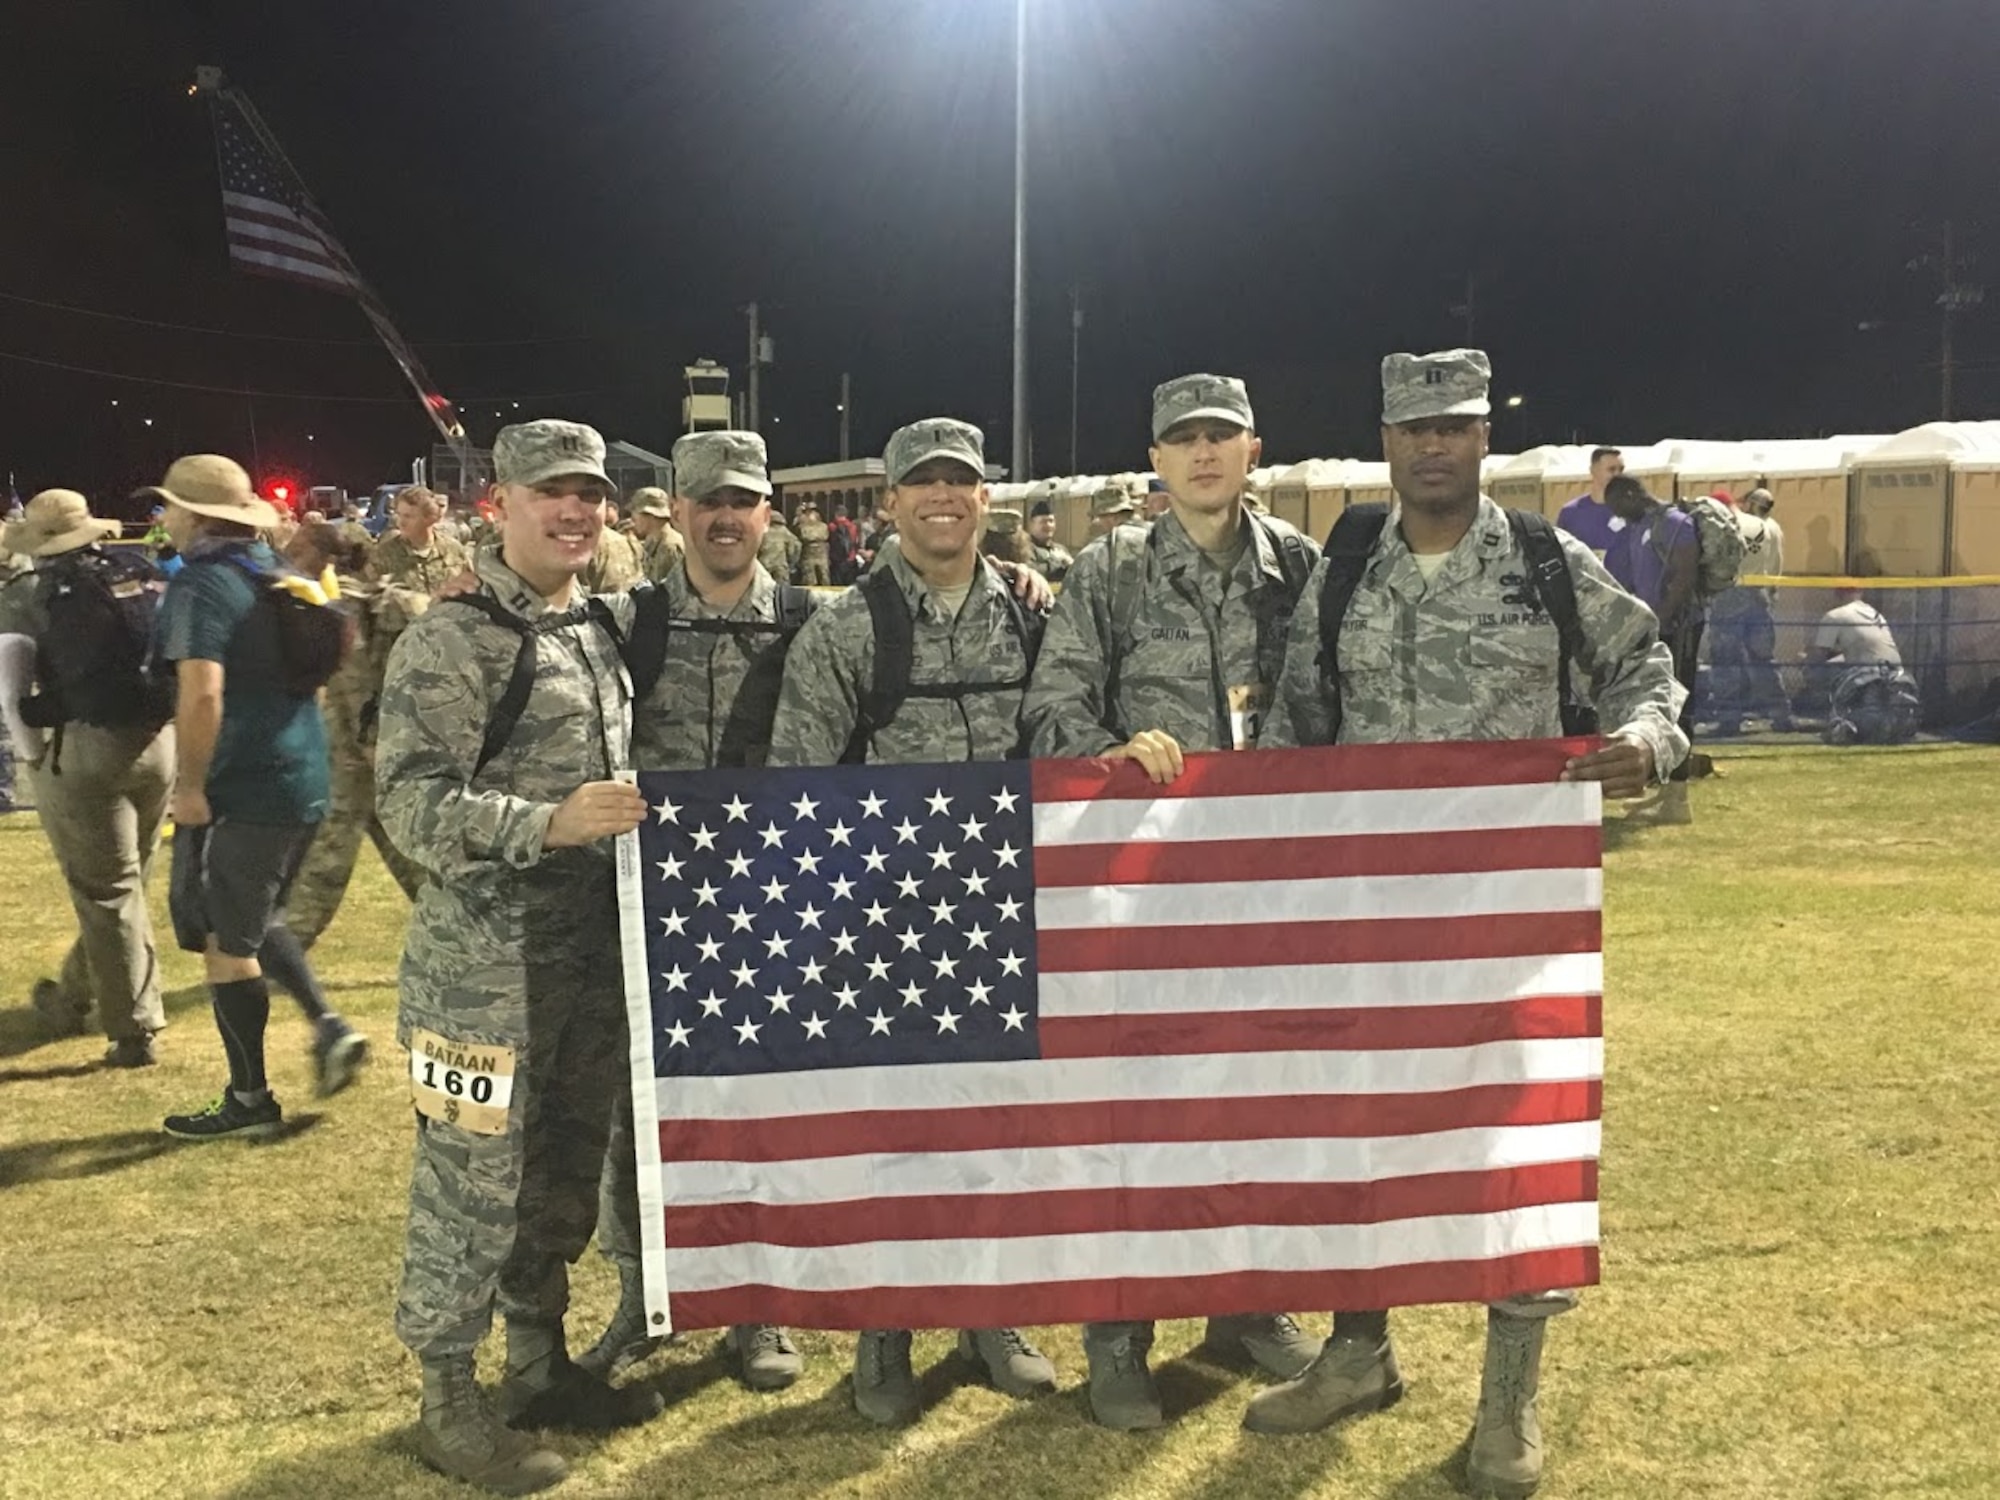 A team from Altus Air Force Base, Okla. holds up the American Flag before participating in the 29th annual Bataan Memorial Death March, March 25, 2018, at White Sands, N.M.